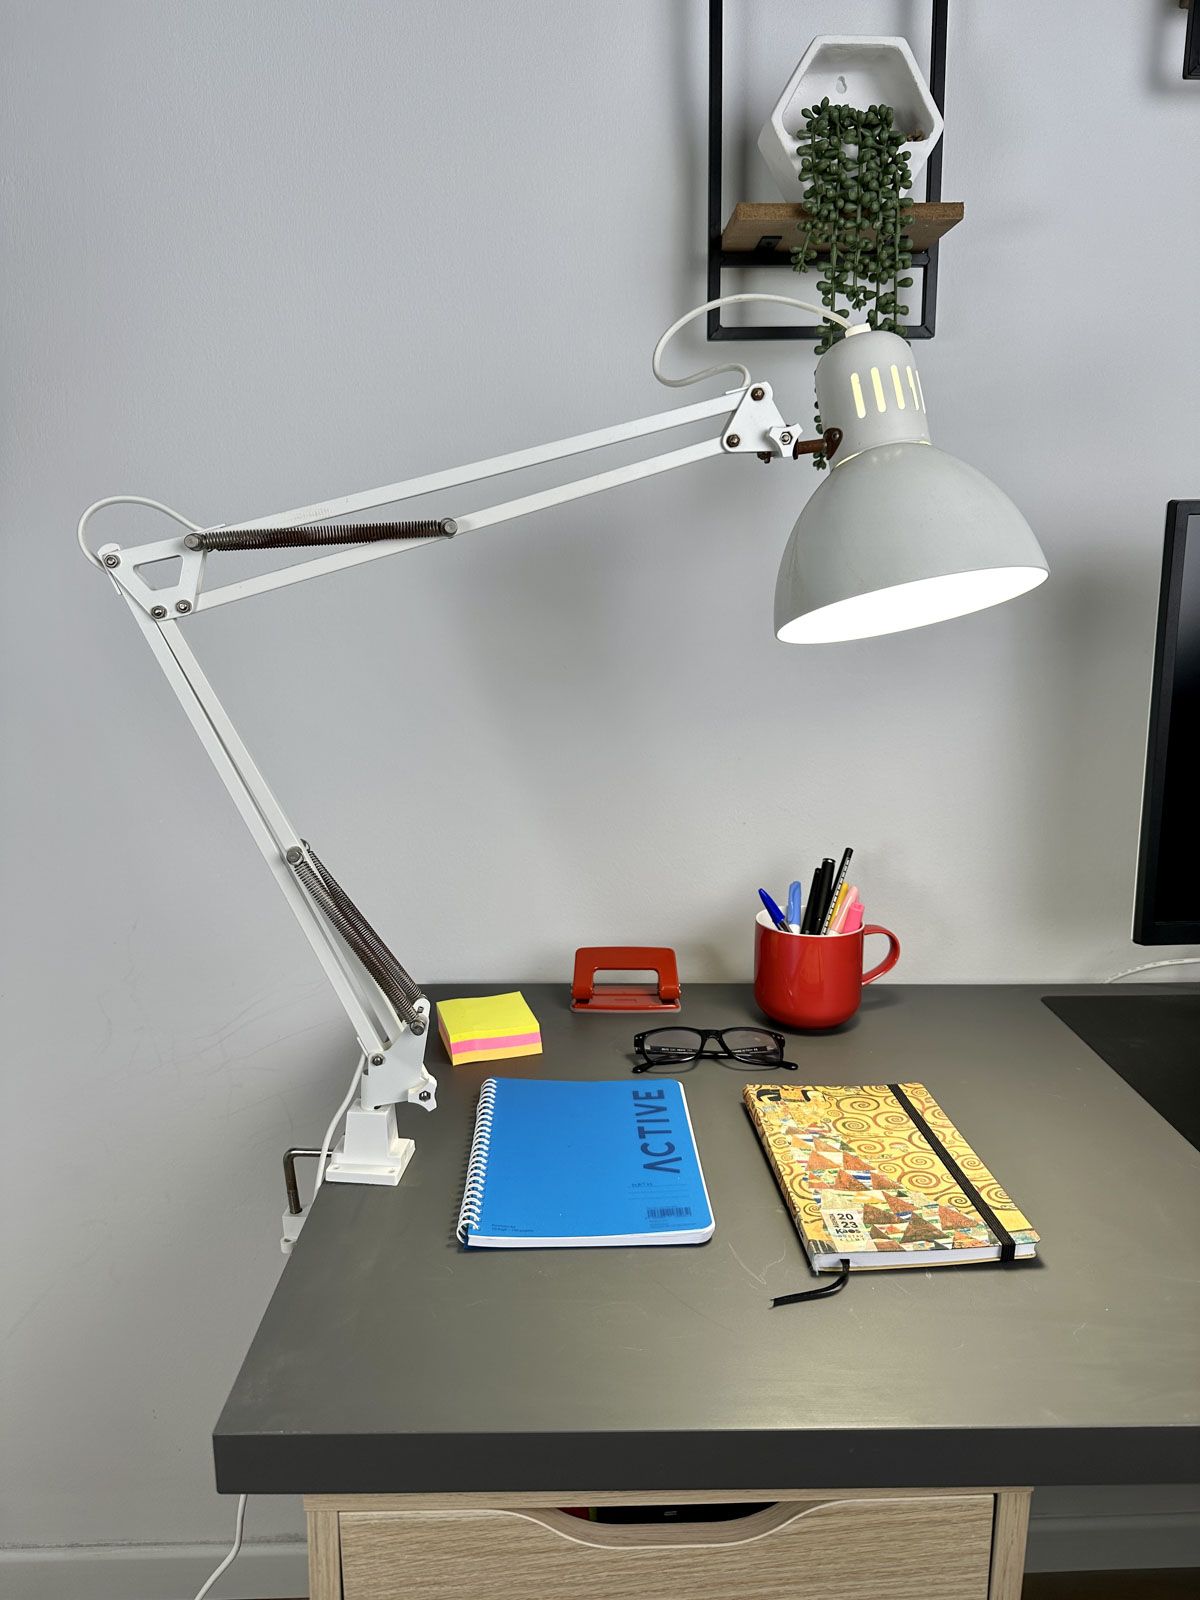 Use a Clamp to Optimize Desk Space